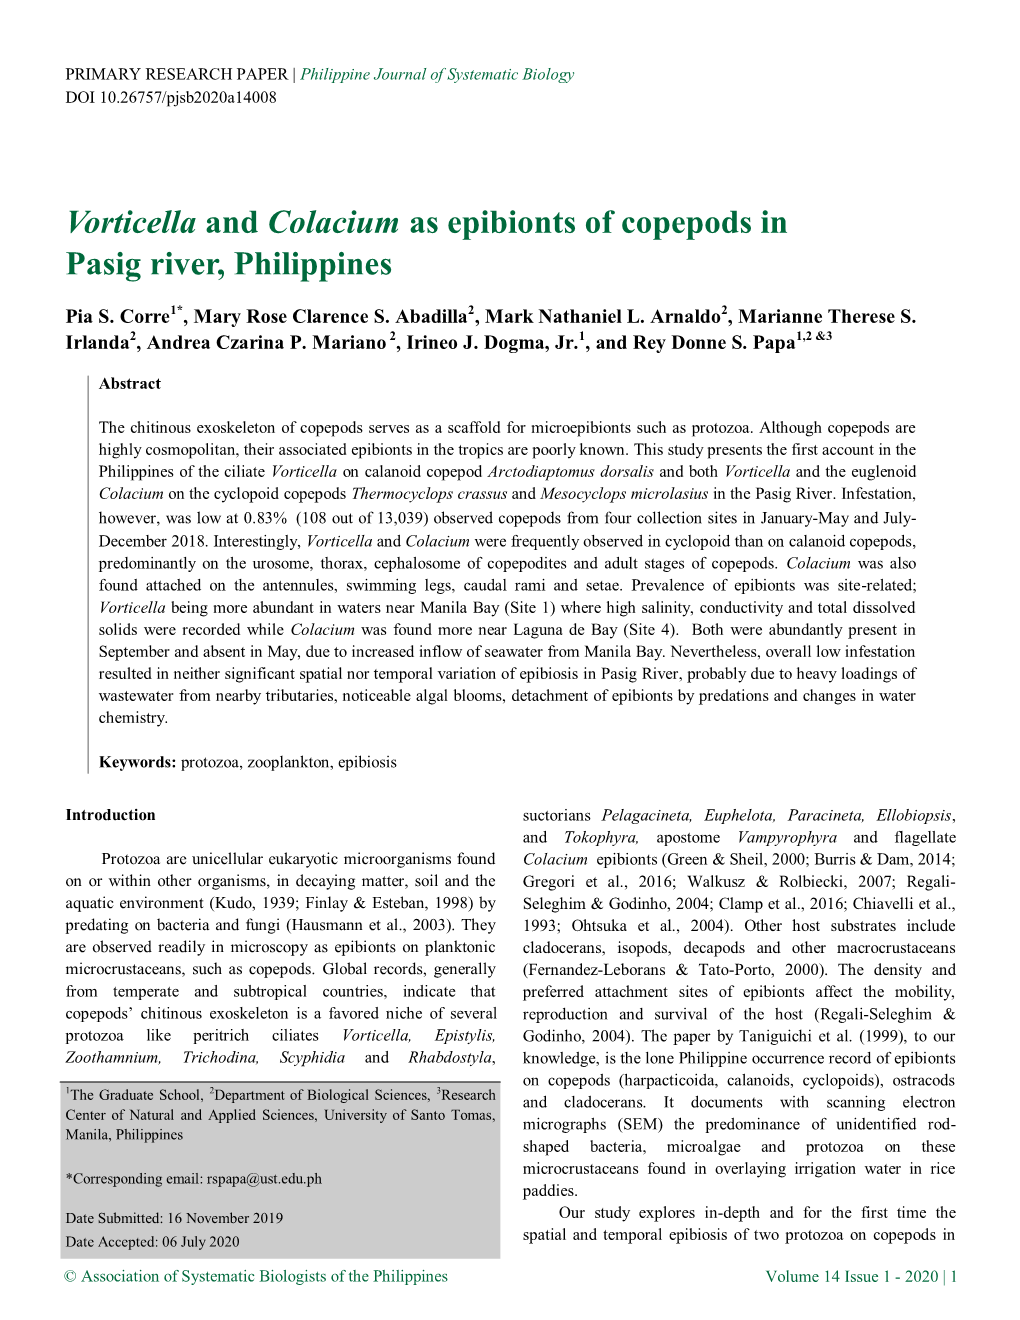 Vorticella and Colacium As Epibionts of Copepods in Pasig River, Philippines